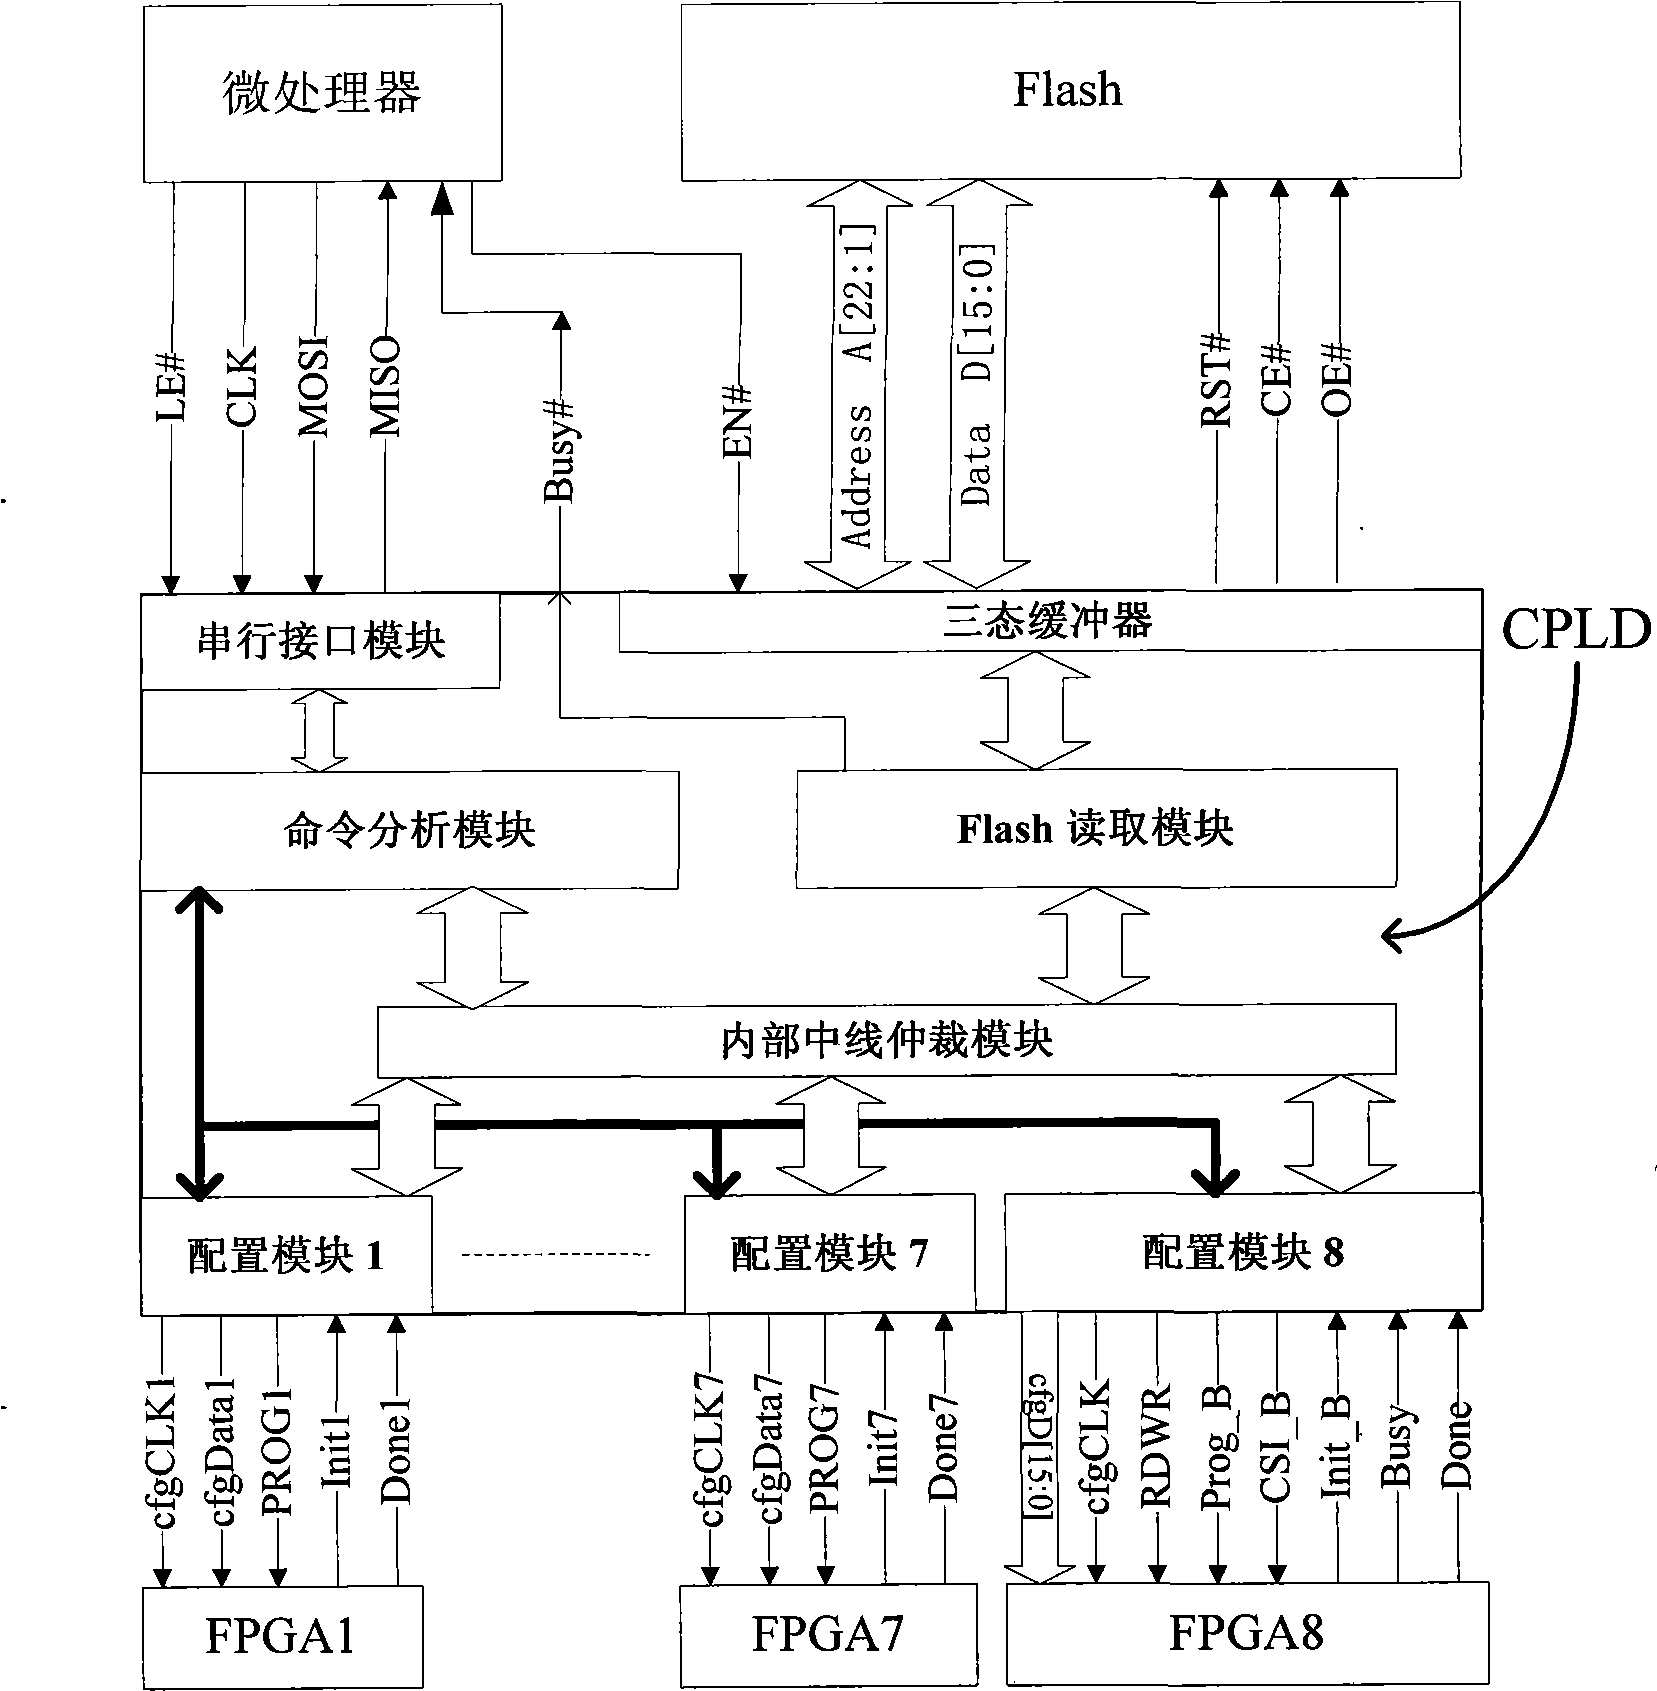 System for unified configuration and management of FPGA chip in equipment